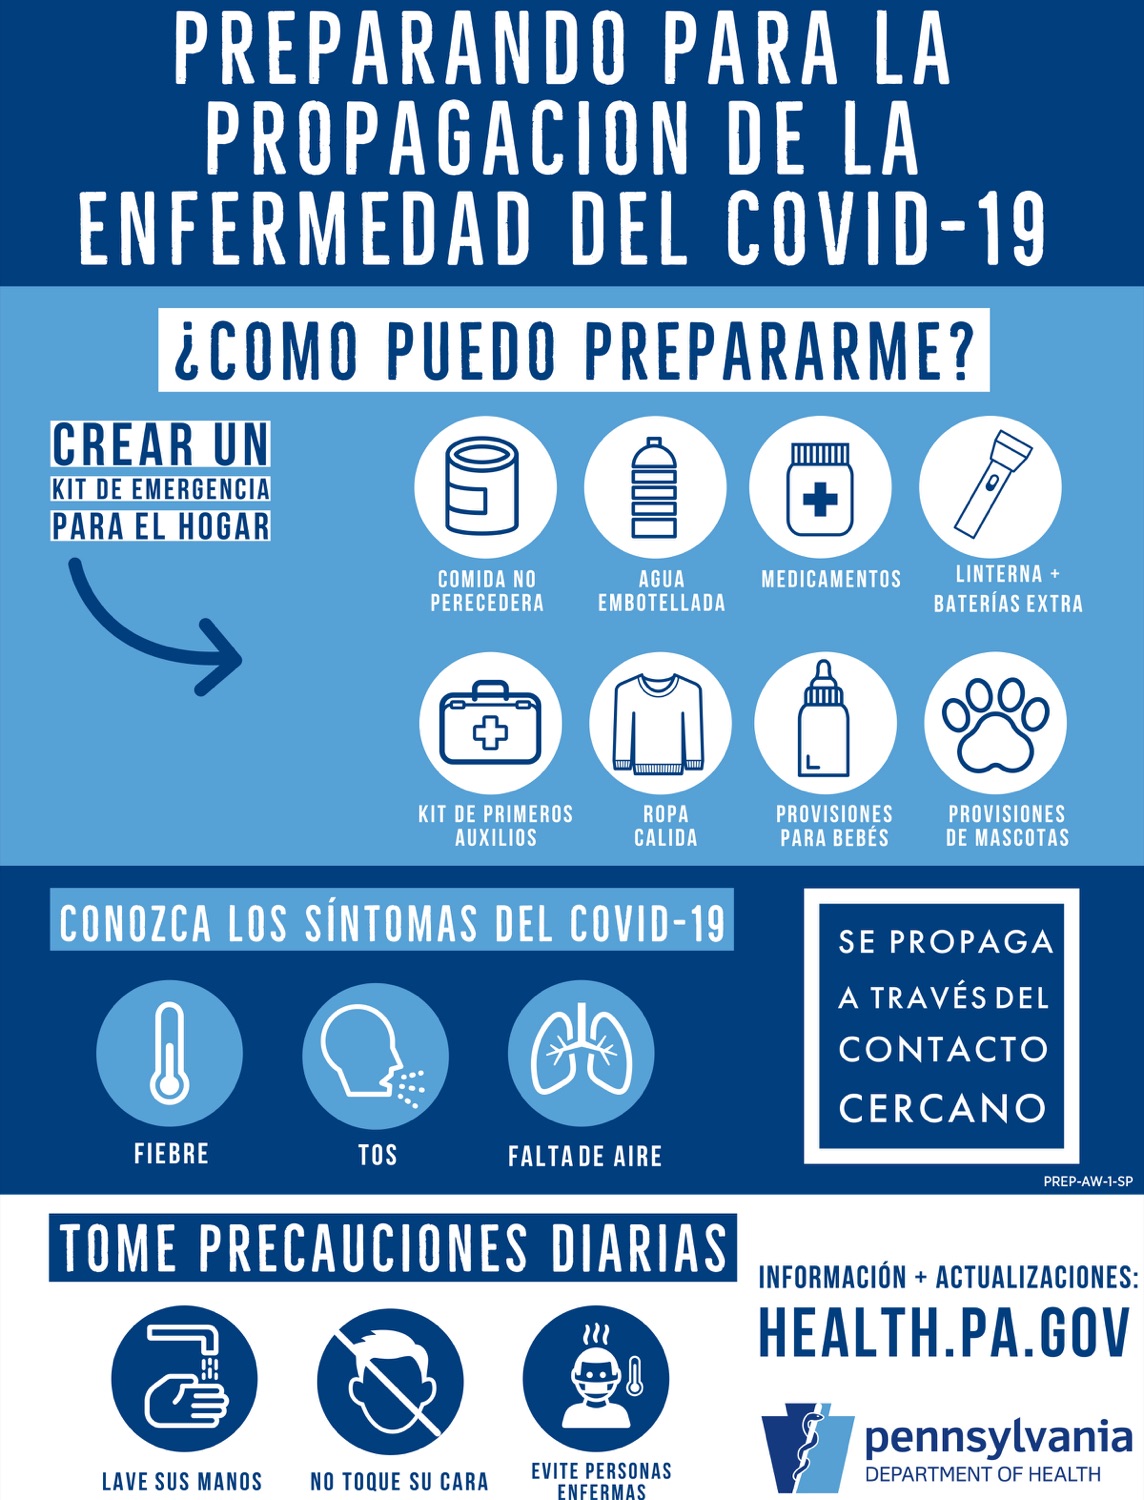 Covid-19 Outreach: Print Poster<br><a href="https://filesource.amperwave.net/commonwealthofpa/photo/17885_newspaper_PREP-AW-2_SP.jpg" target="_blank">⇣ Download Photo</a>